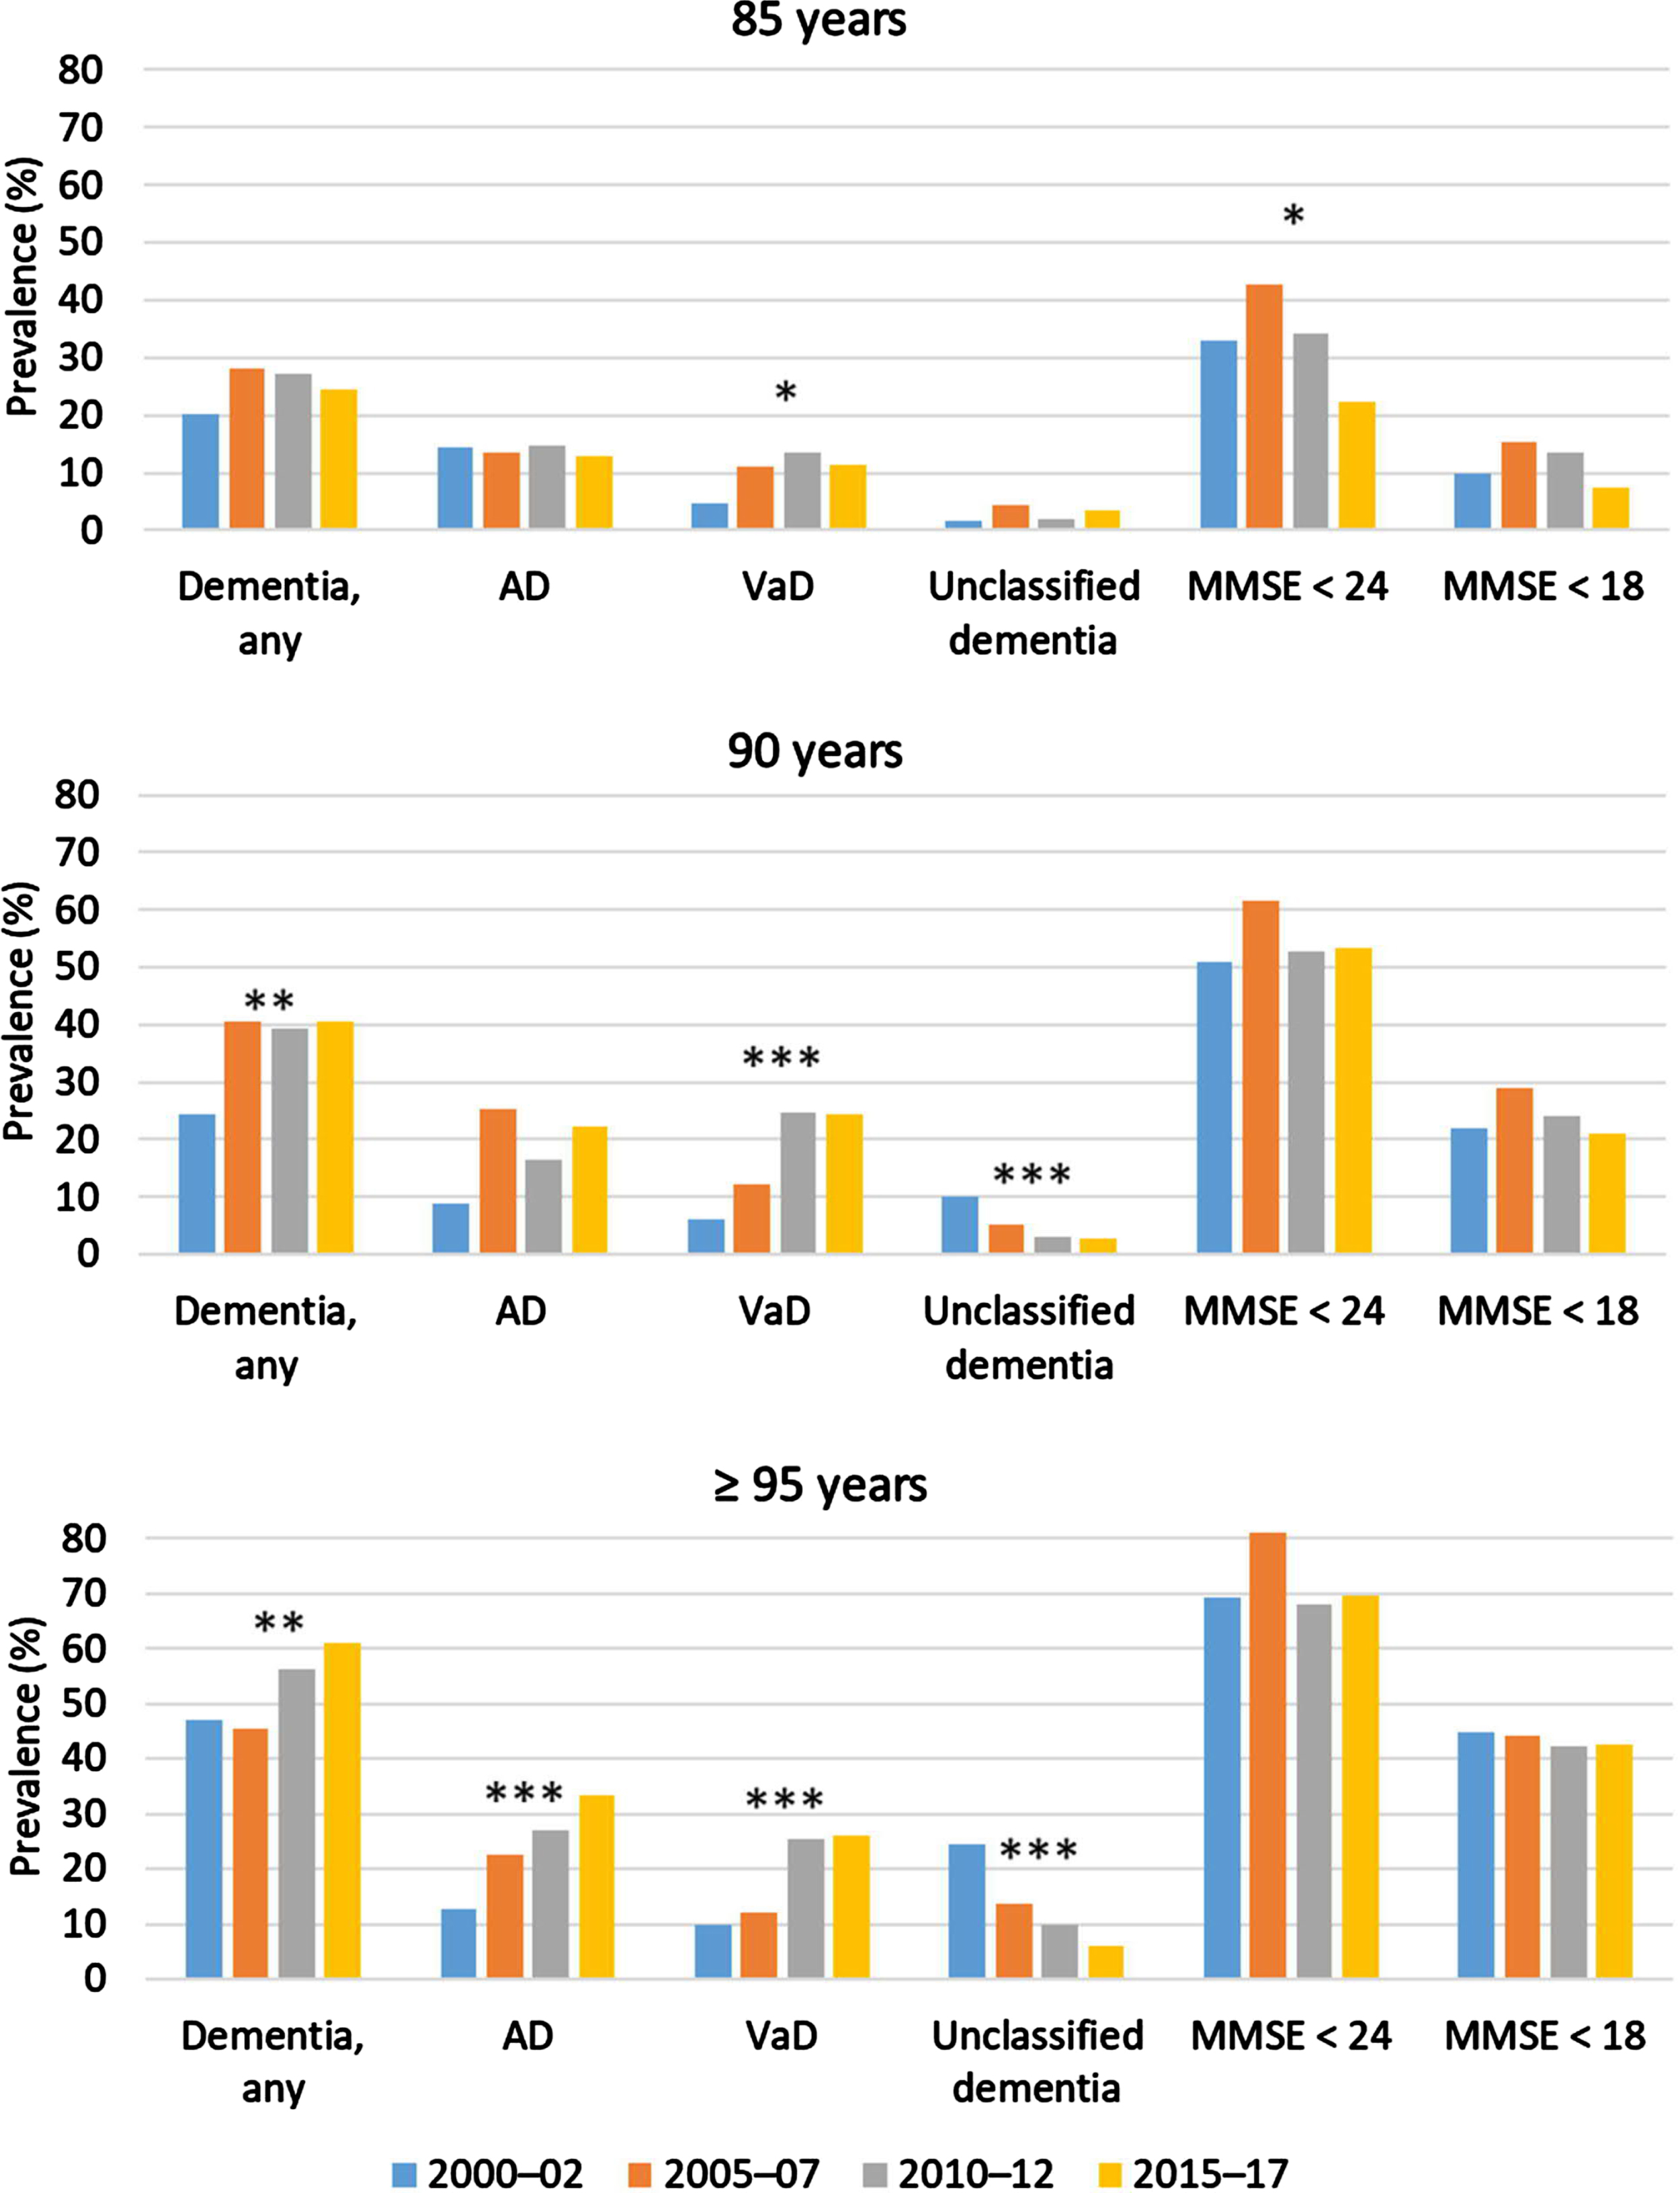 Prevalences of dementia and cognitive impairment. The prevalences of MMSE < 24 or < 18 were investigated among visited participants; all other prevalences were investigated in the full sample. MMSE < 24 or < 18 denotes achieved points on the assessment, irrespective of dementia status. *p < 0.05 for regression of prevalence with later participation year, sex adjusted (except for MMSE score < 24 among 85-year-olds, which was adjusted for sex and education, as shown in the Supplement for the non-linear model). **p < 0.01 and ***p < 0.001 for regression of prevalence with later participation year, sex adjusted. AD, Alzheimer’s disease; VaD, vascular dementia; MMSE, Mini-Mental State Examination.